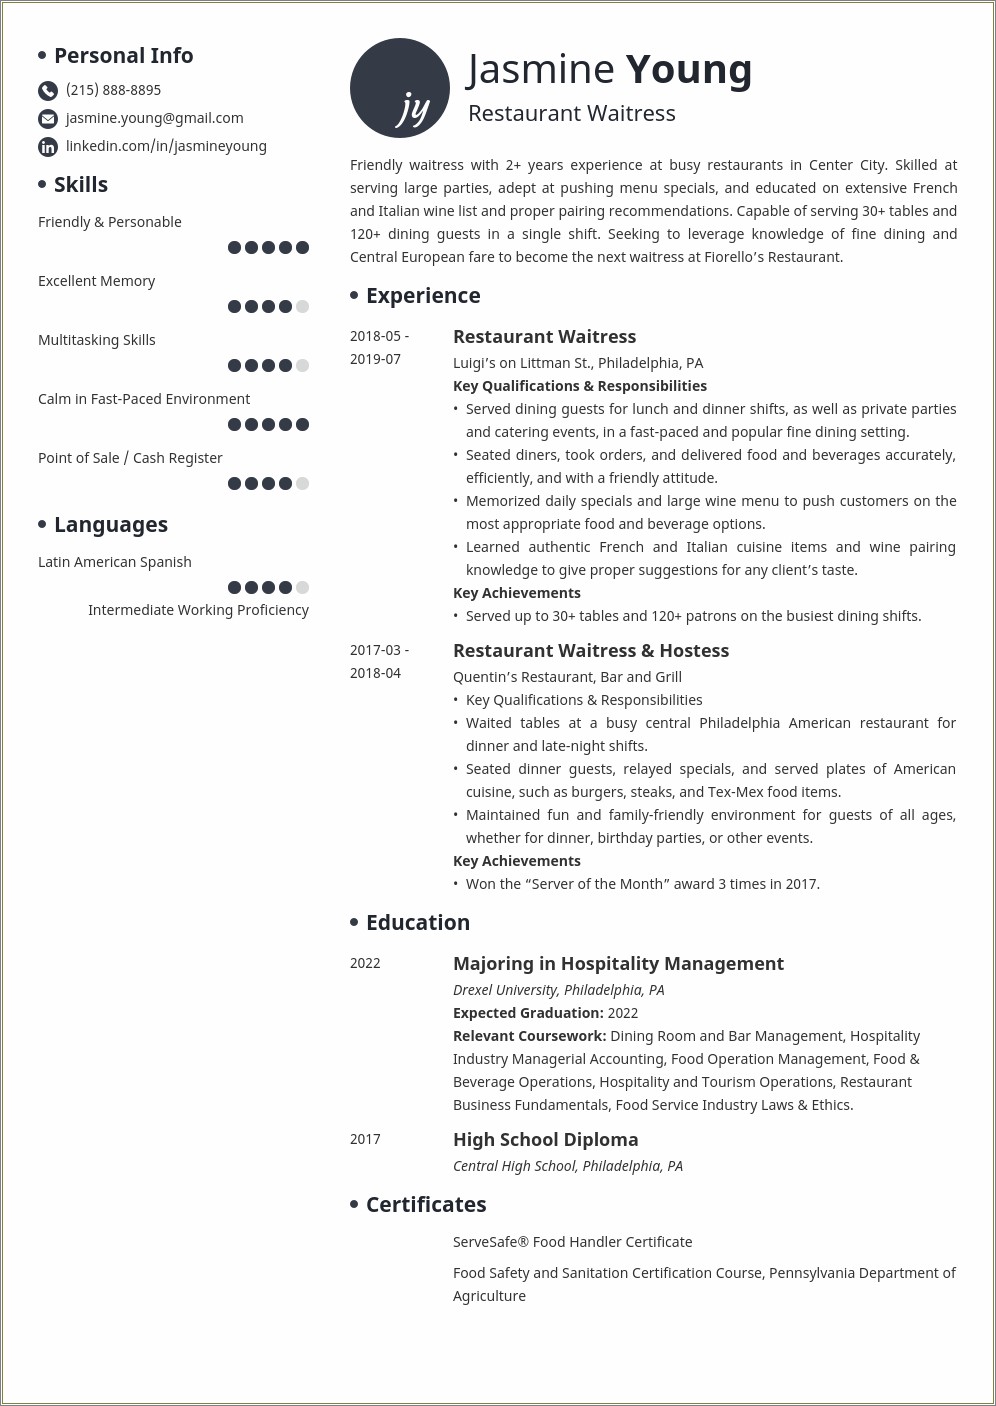 Resume Lhaven't Worked In 17 Years